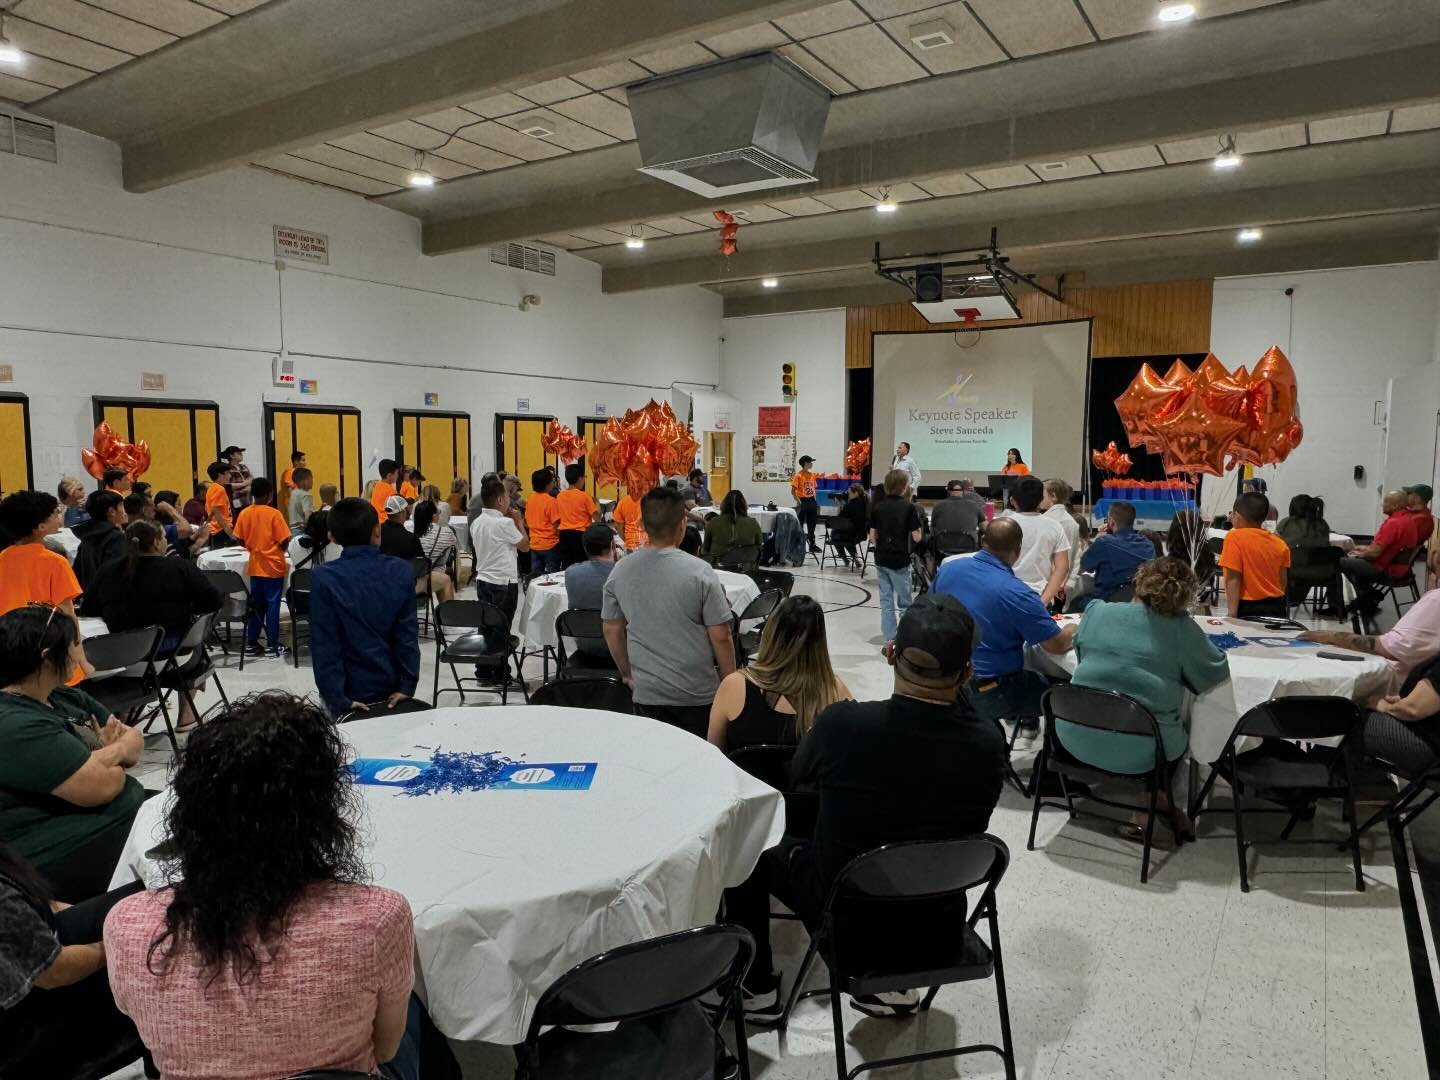 Last night was special. @mypowerinc was founded in 2009 and the first pilot program was launched in 2010 with 24 girls at one elementary school in Hobbs.

Last night, the FIRST boys program held their graduation with 24 young men in this initial coho